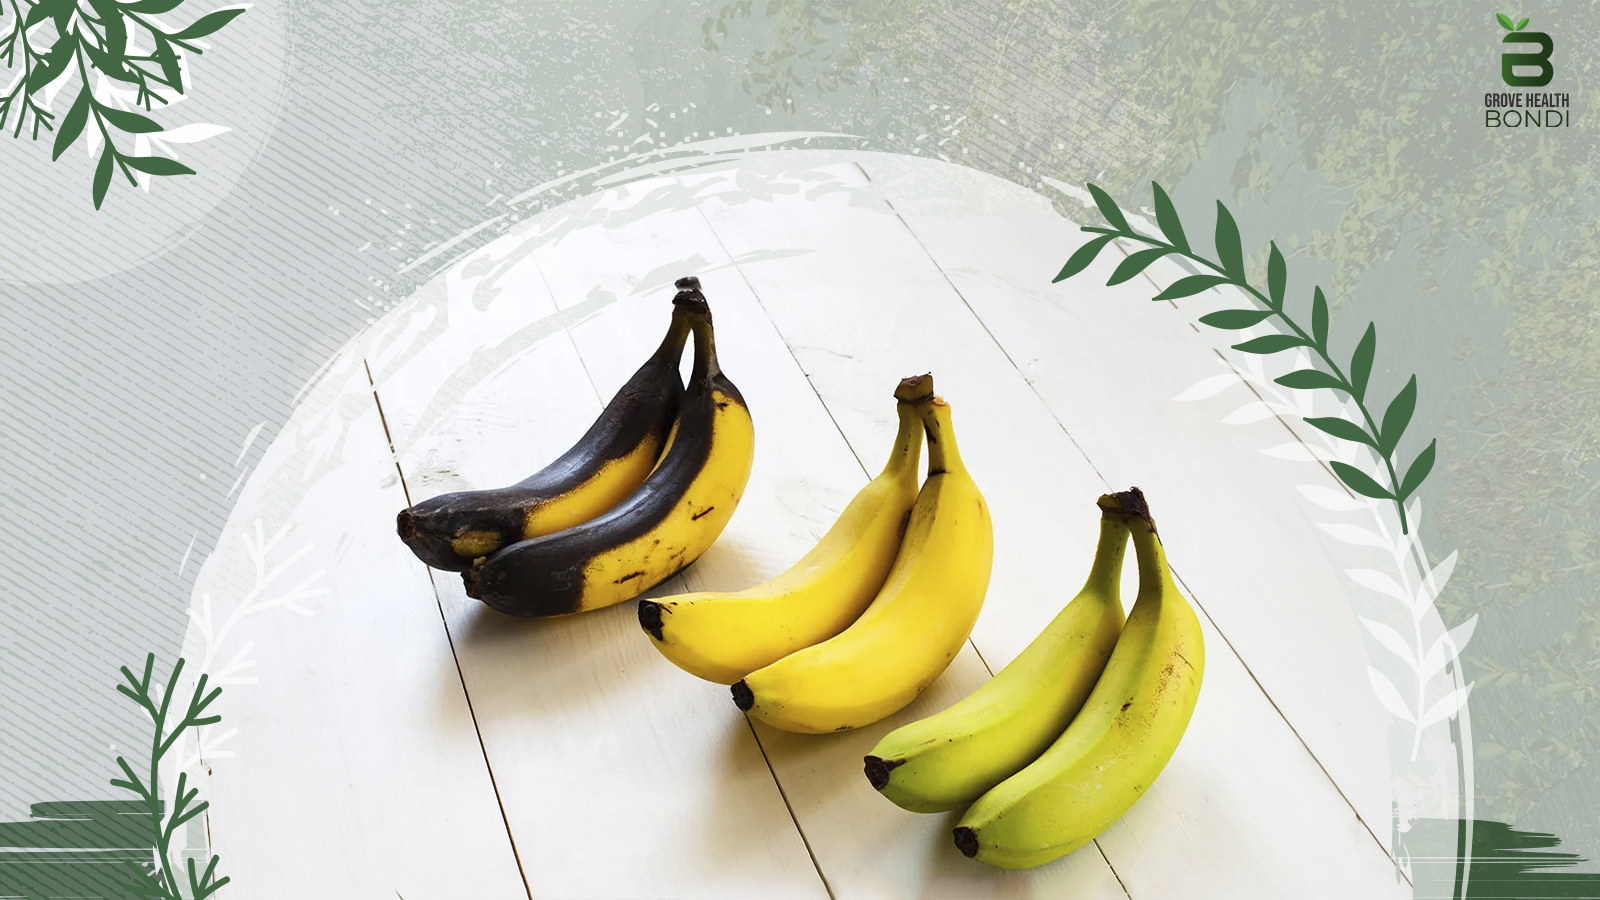 Green or Yellow Banana Peels: Which is the Superior Choice for Health?